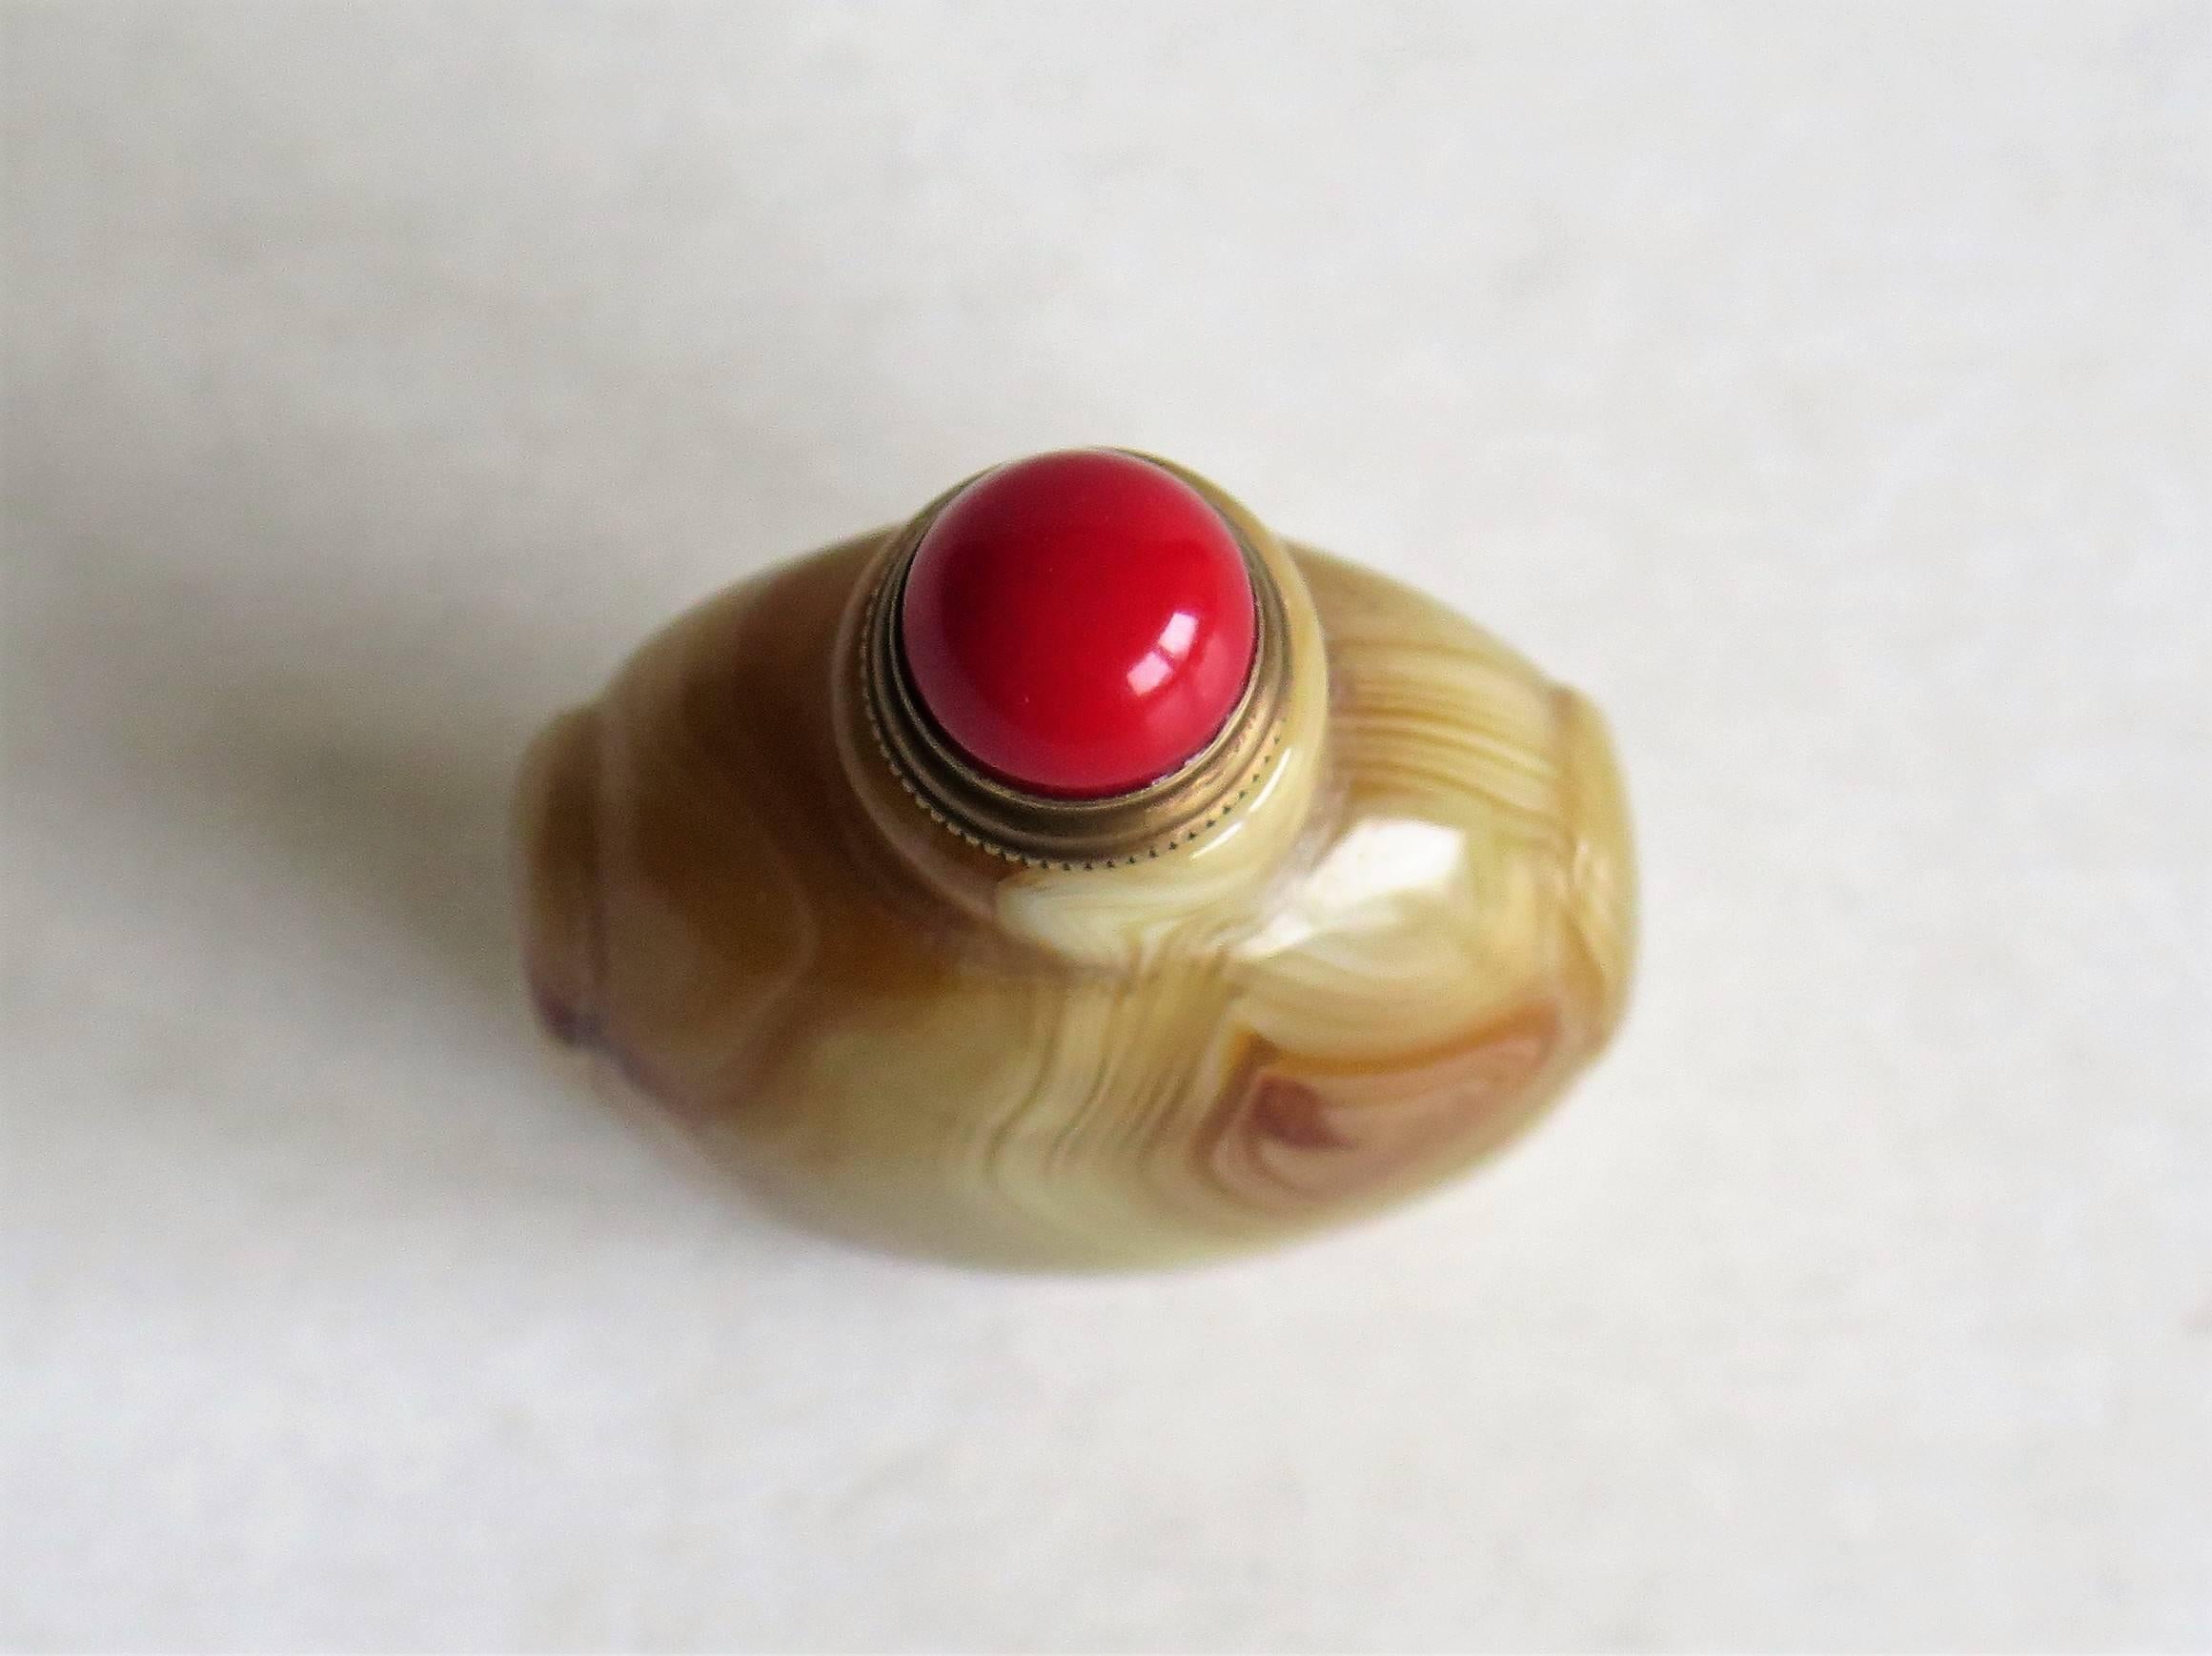 20th Century Chinese Snuff Bottle Natural Agate Red Ceramic Stopper and Spoon, circa 1930